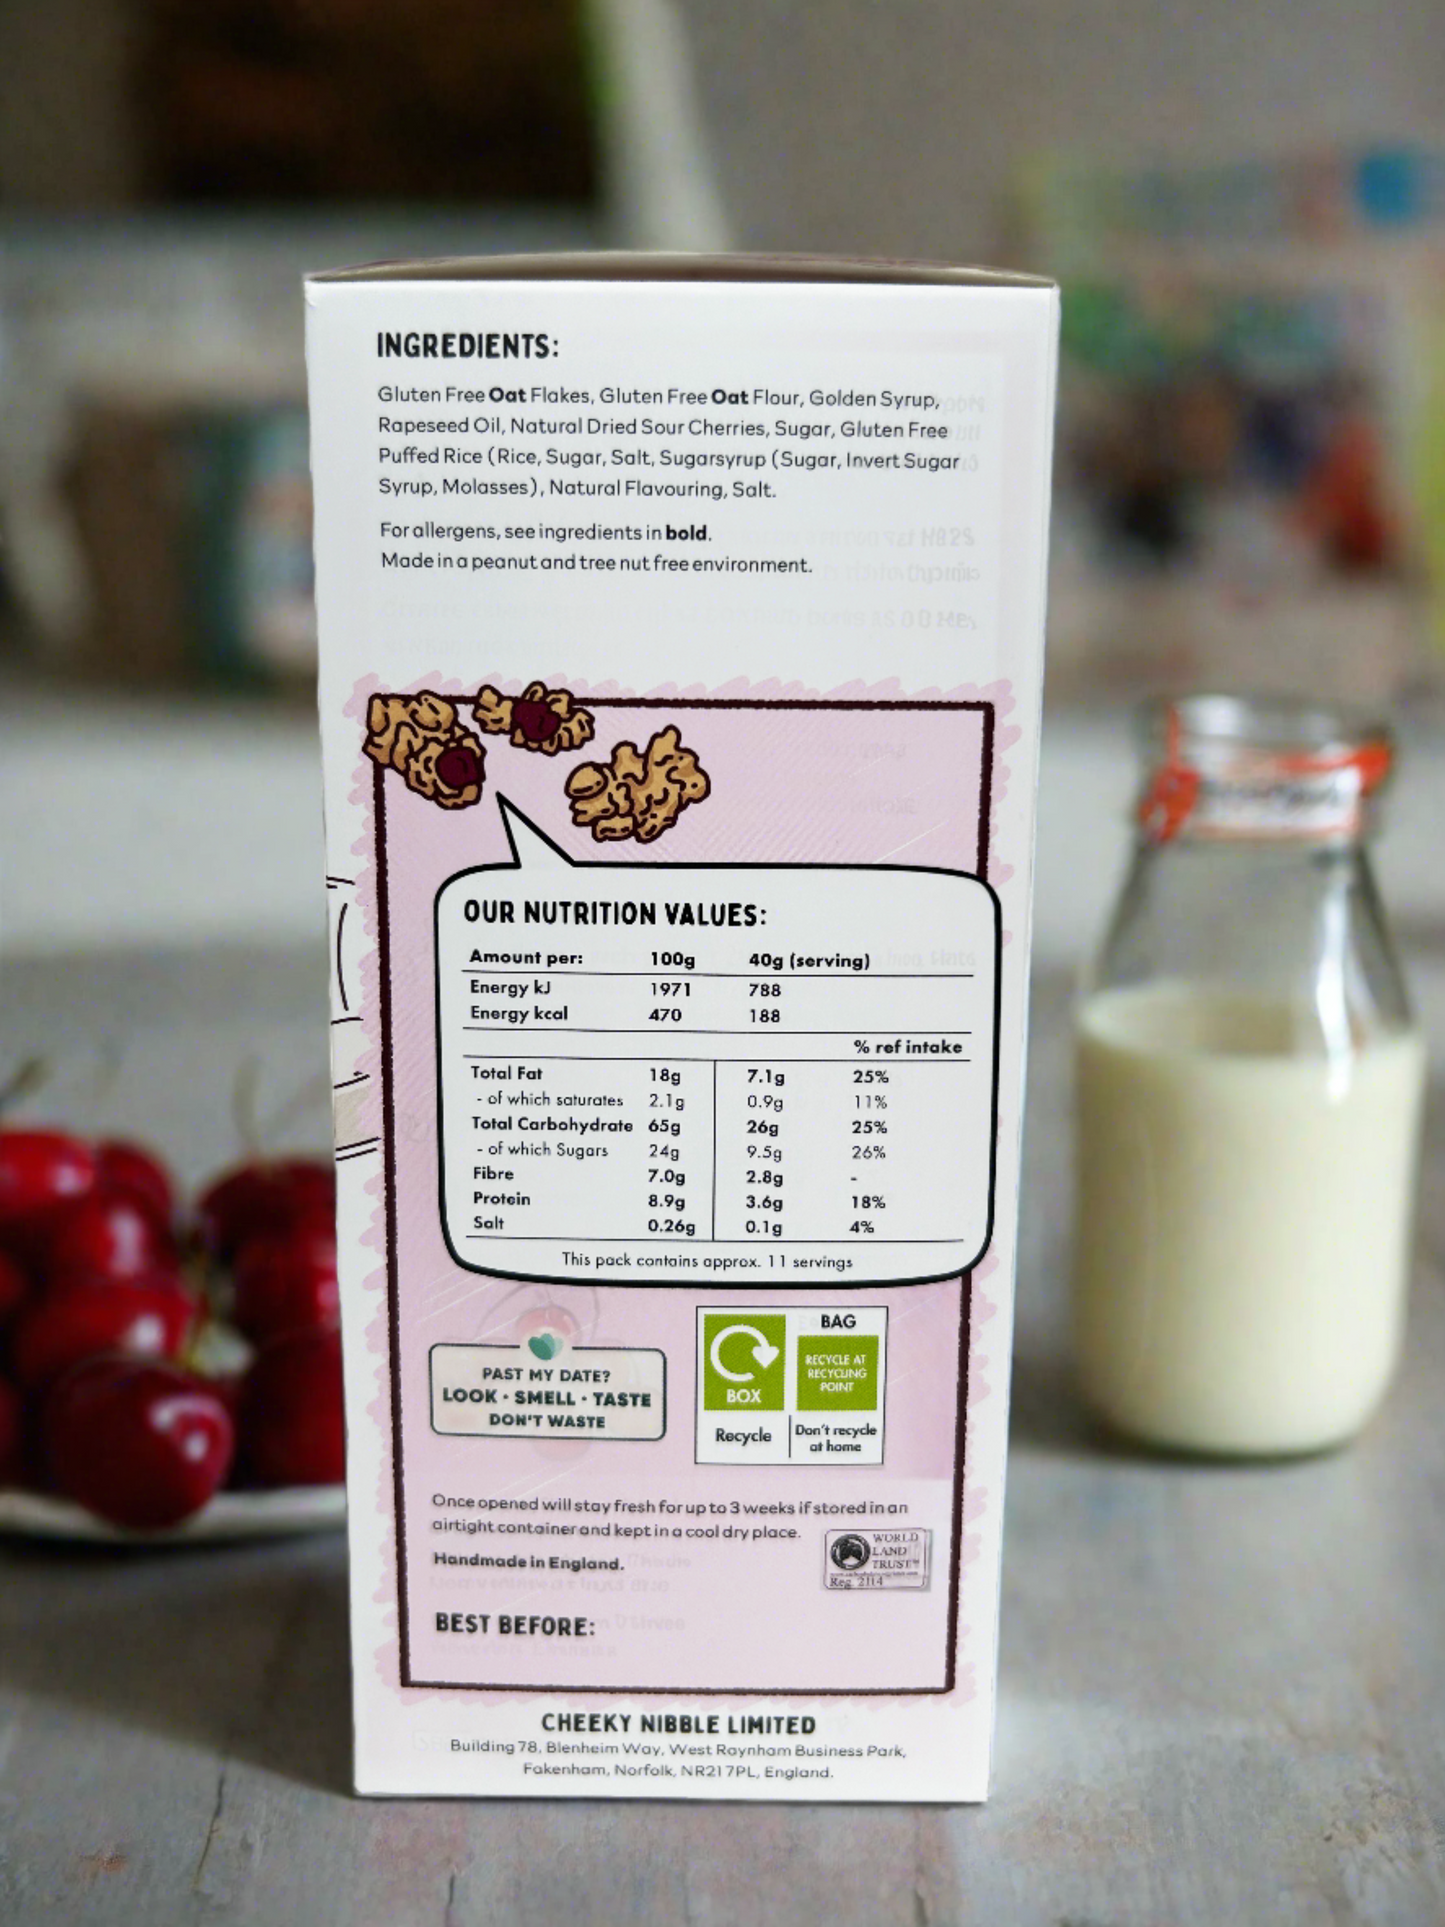 Alt text: A cereal box with a prominent display of nutritional information for Cherry Bakewell flavored granola. The label features details such as serving size, calorie count, macronutrient breakdown (including protein, fat, and carbohydrates), and essential vitamins and minerals. The text is legible and clear, providing consumers with essential dietary information to make informed choices.